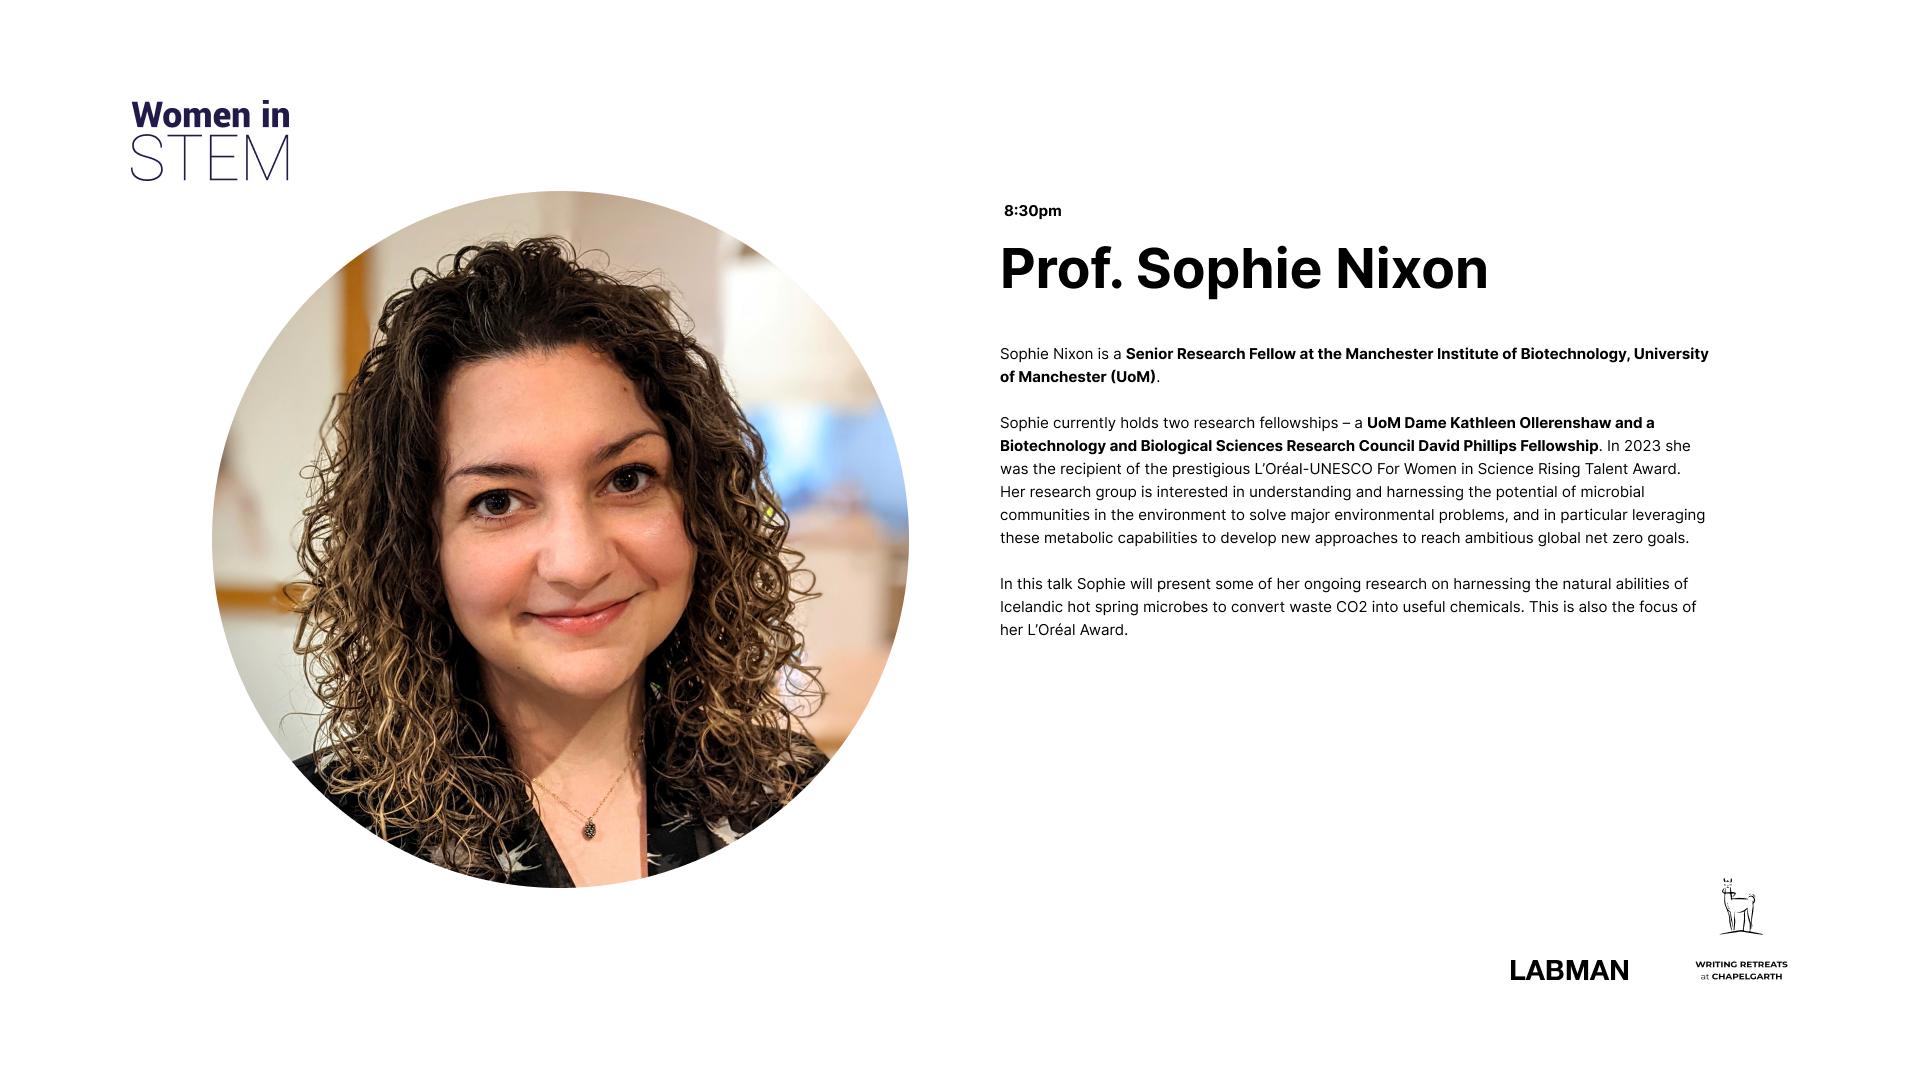 Prof. Sophie Nixon will be speaking at Labman's Science Cabaret